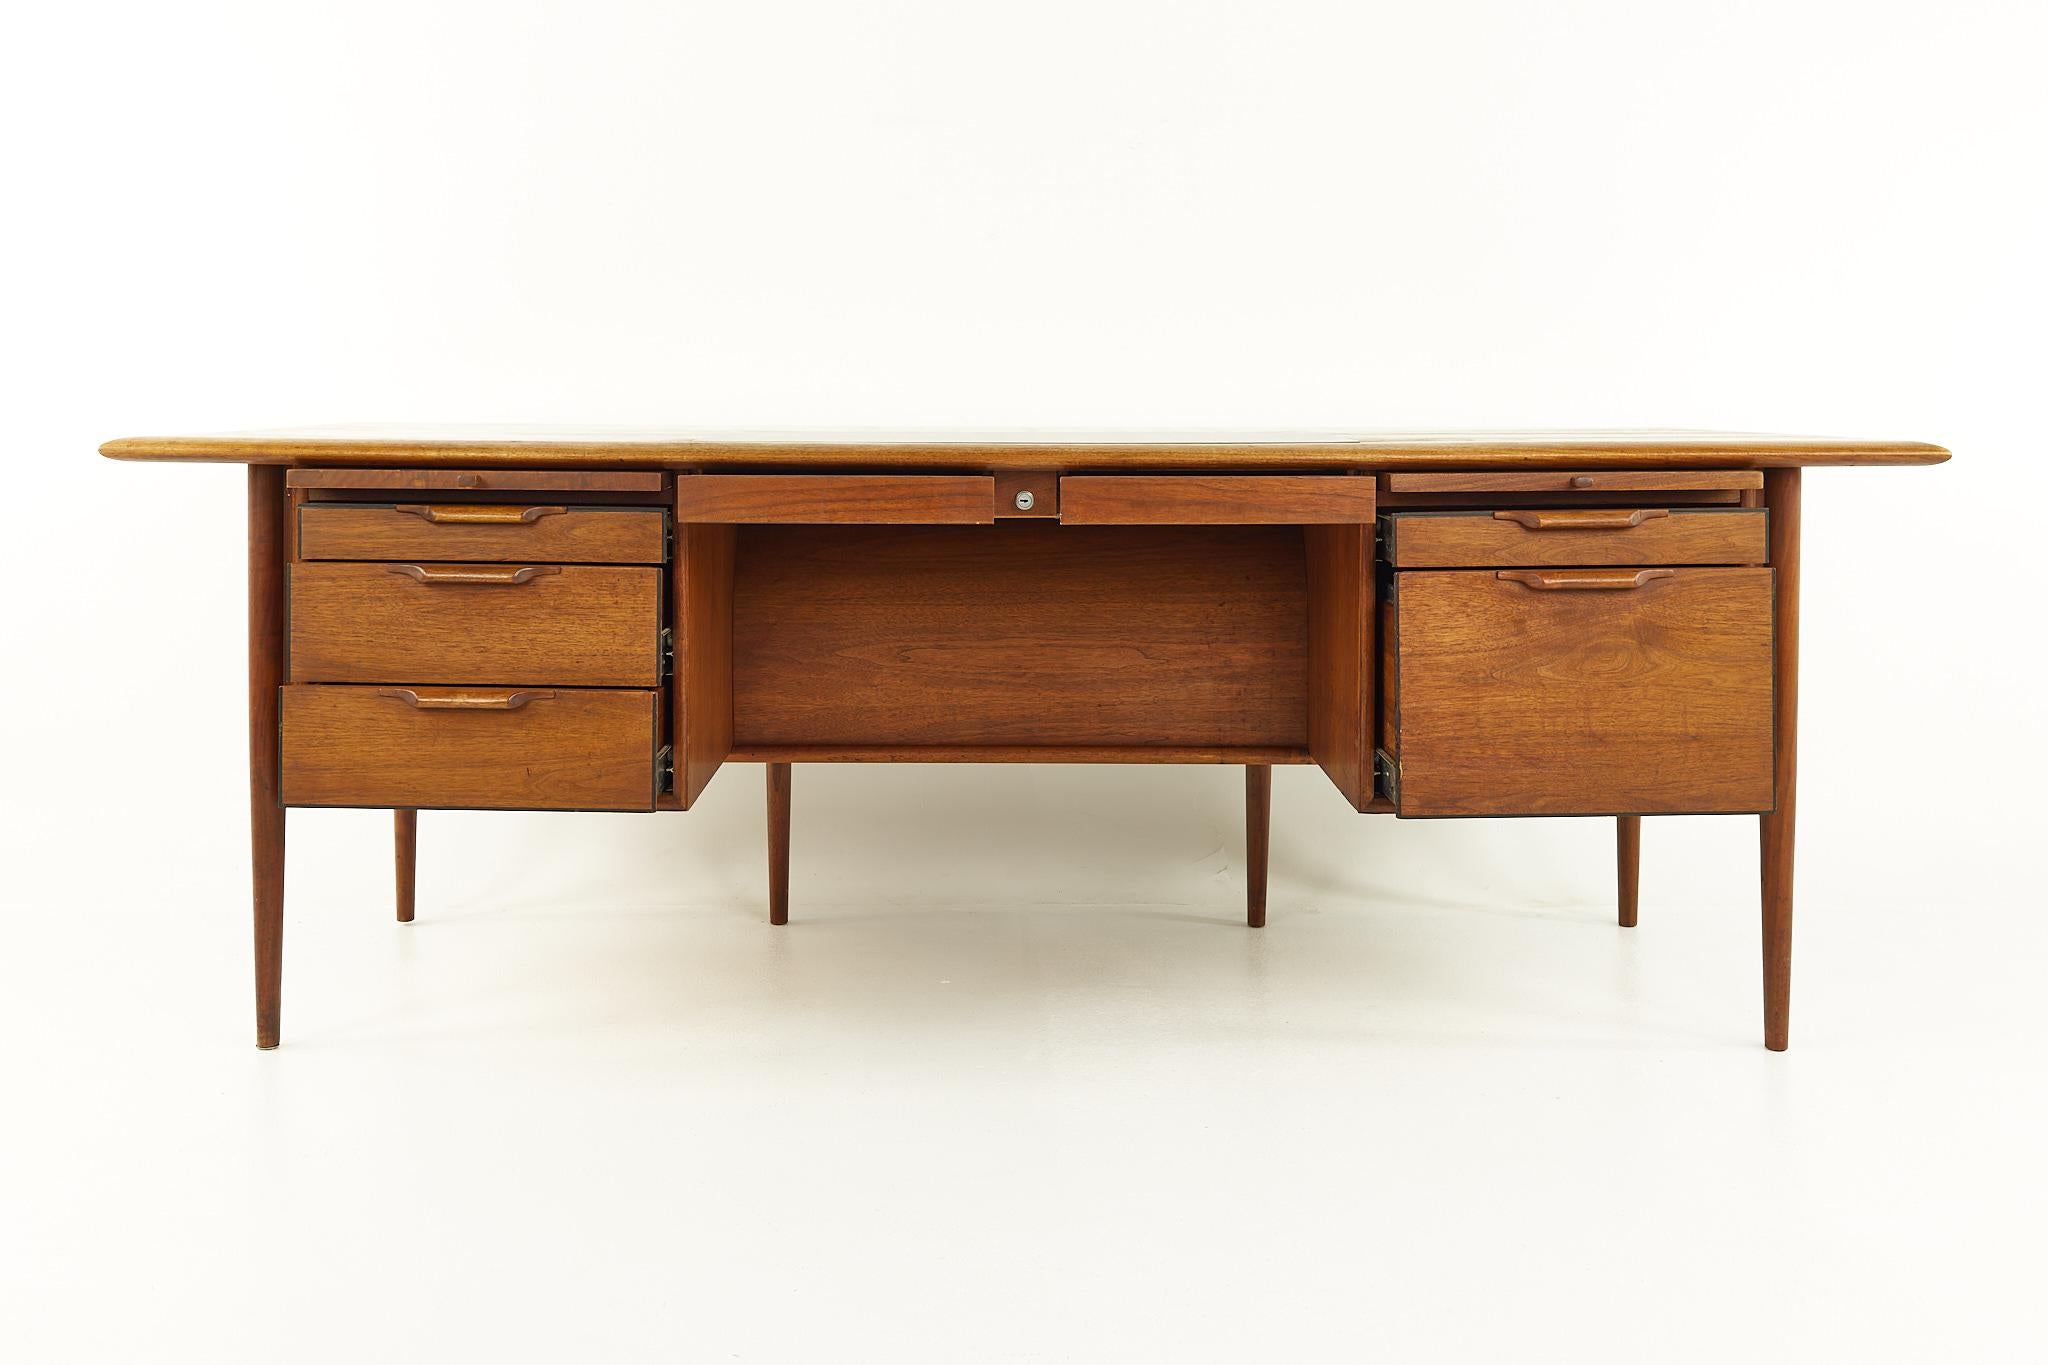 Alma Castilian Line Mid Century Walnut Executive Desk

This desk measures: 83.5 wide x 40.25 deep x 28.75 inches high, with a chair clearance of 25.25 inches

All pieces of furniture can be had in what we call restored vintage condition. That means